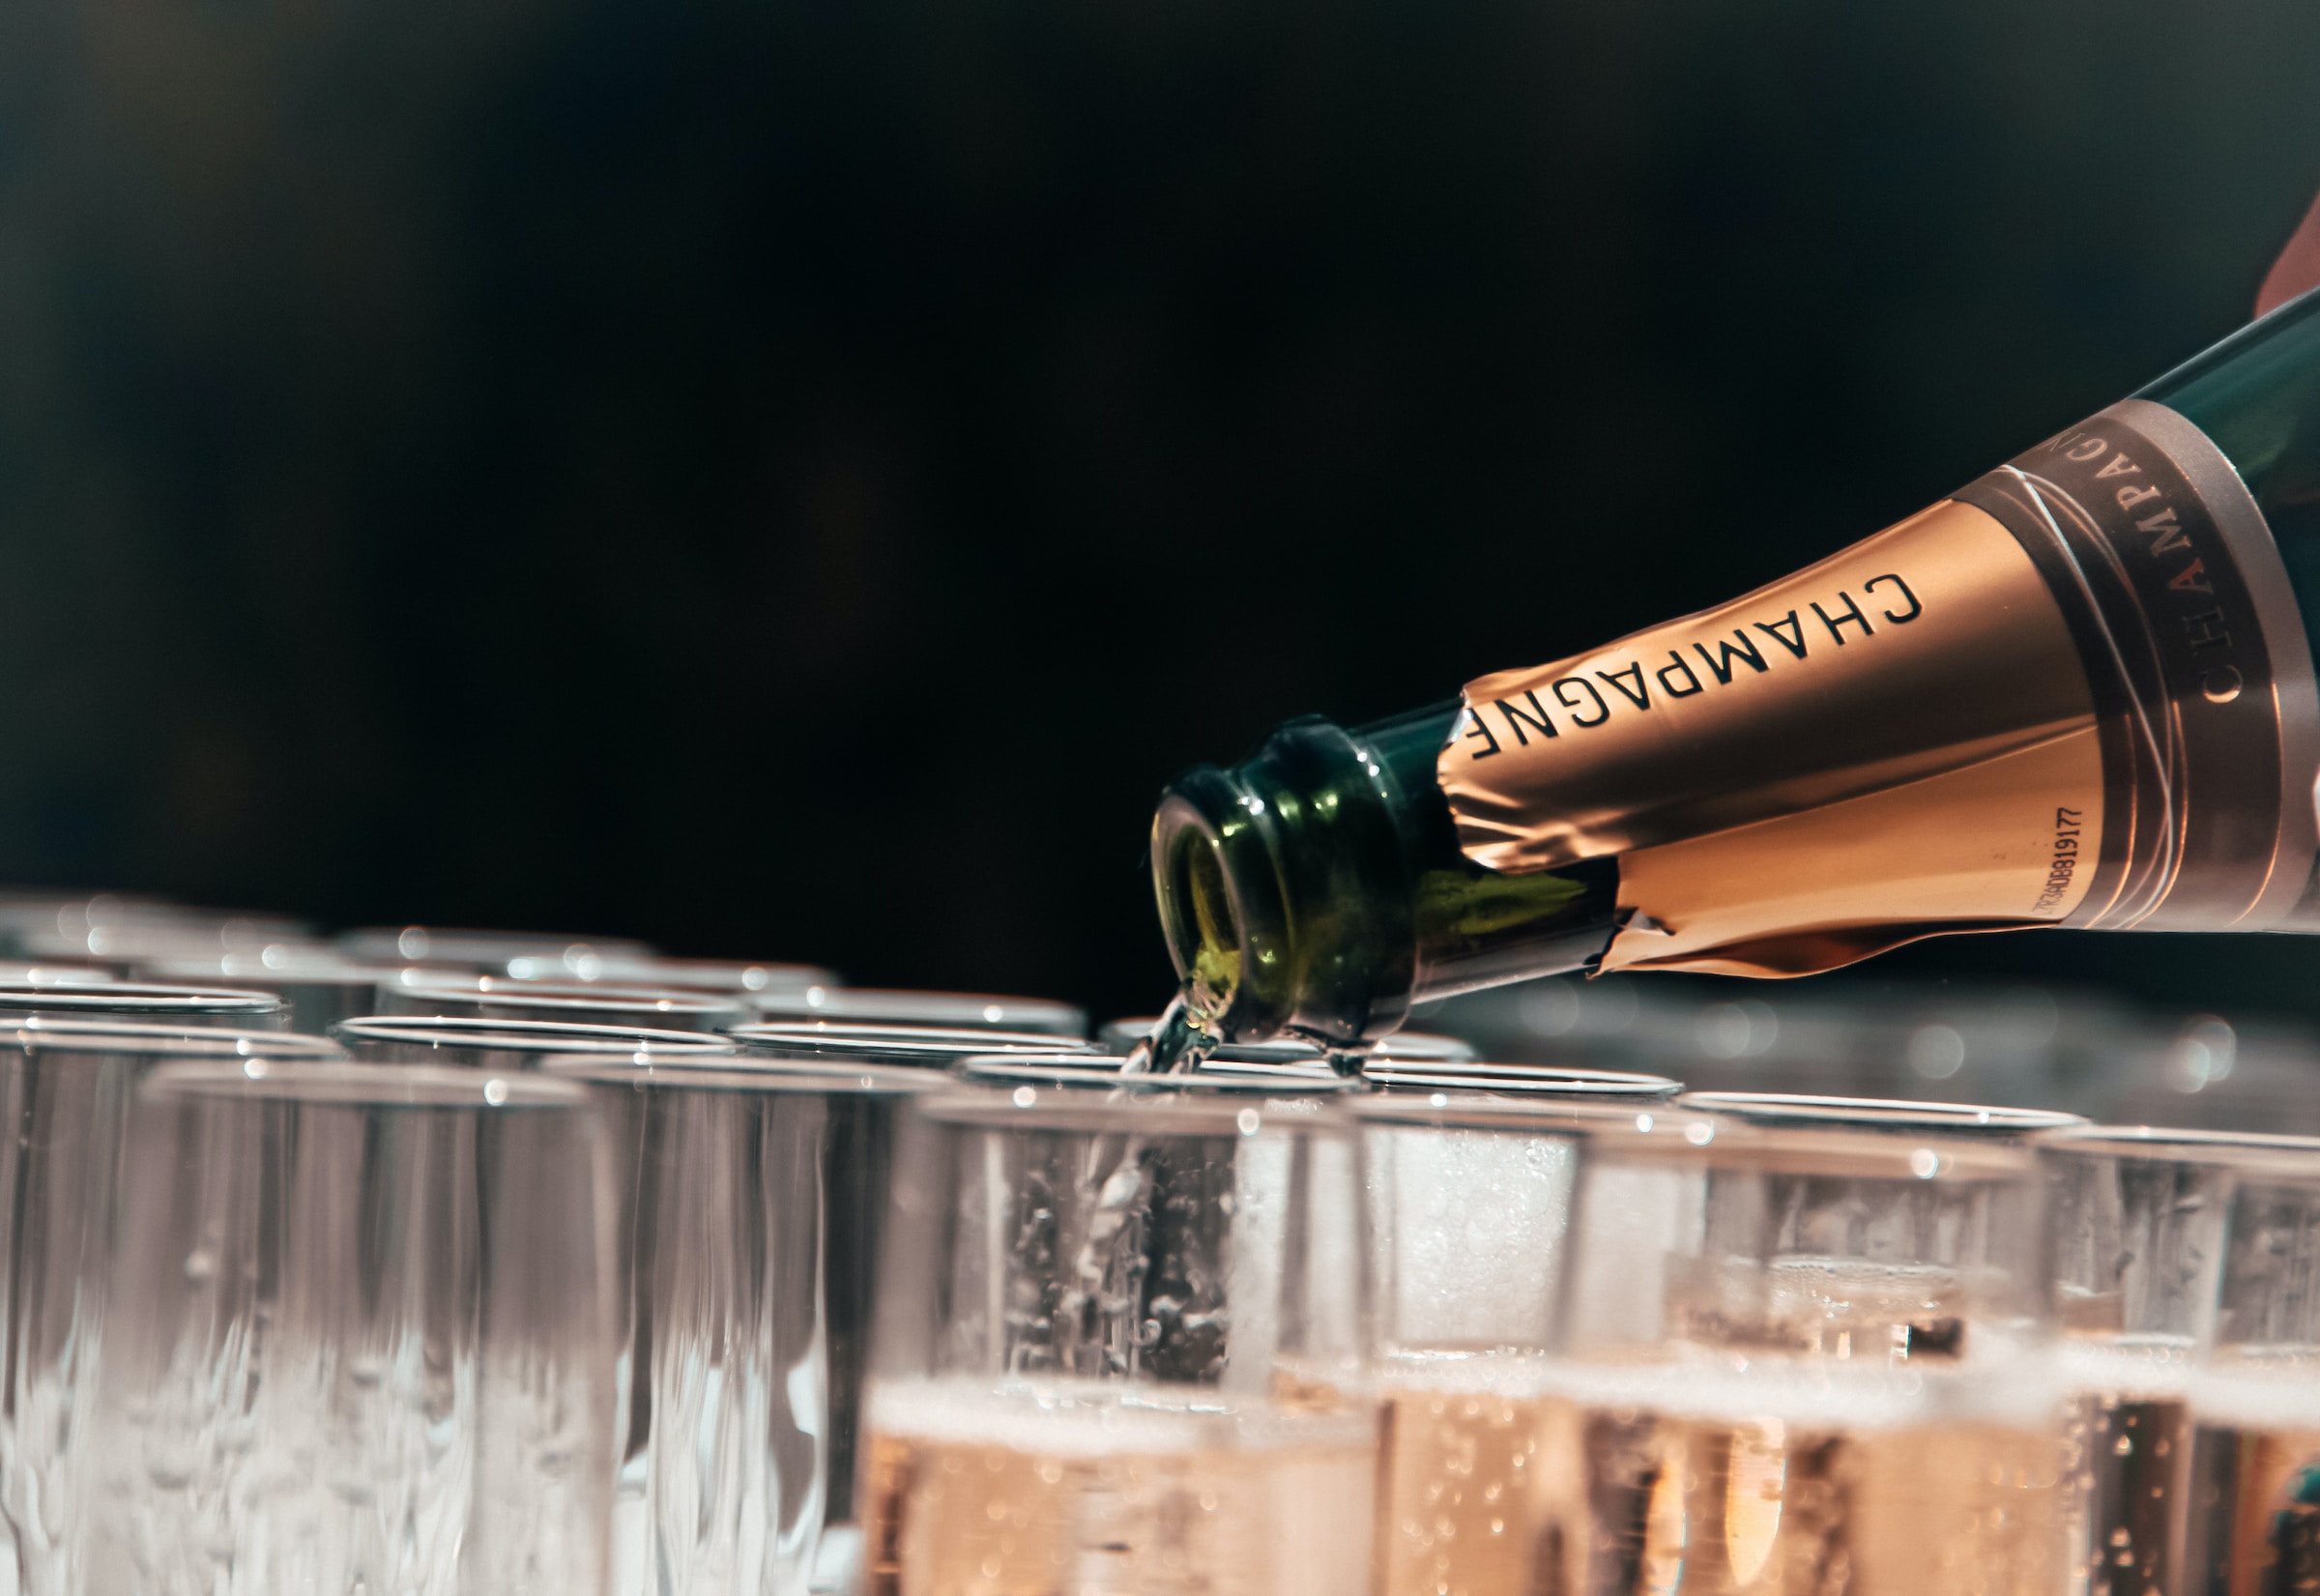 Glasses on champagne being filled with the beverage | Source: Unsplash